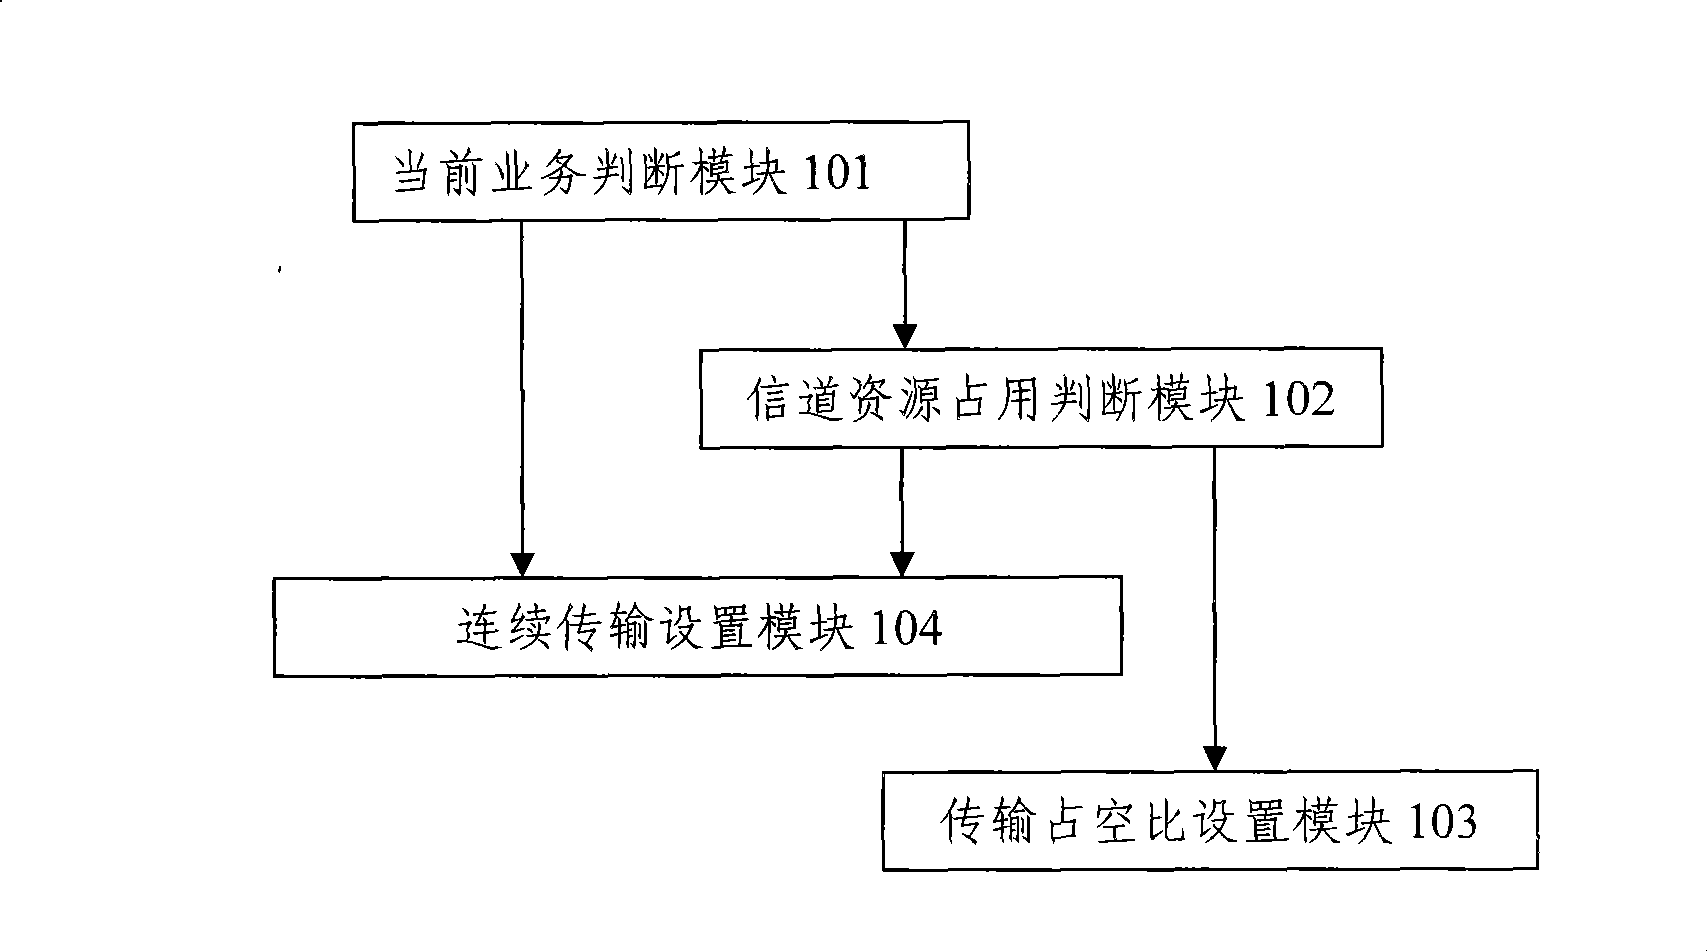 Downlink service transmission method and apparatus in CDMA system